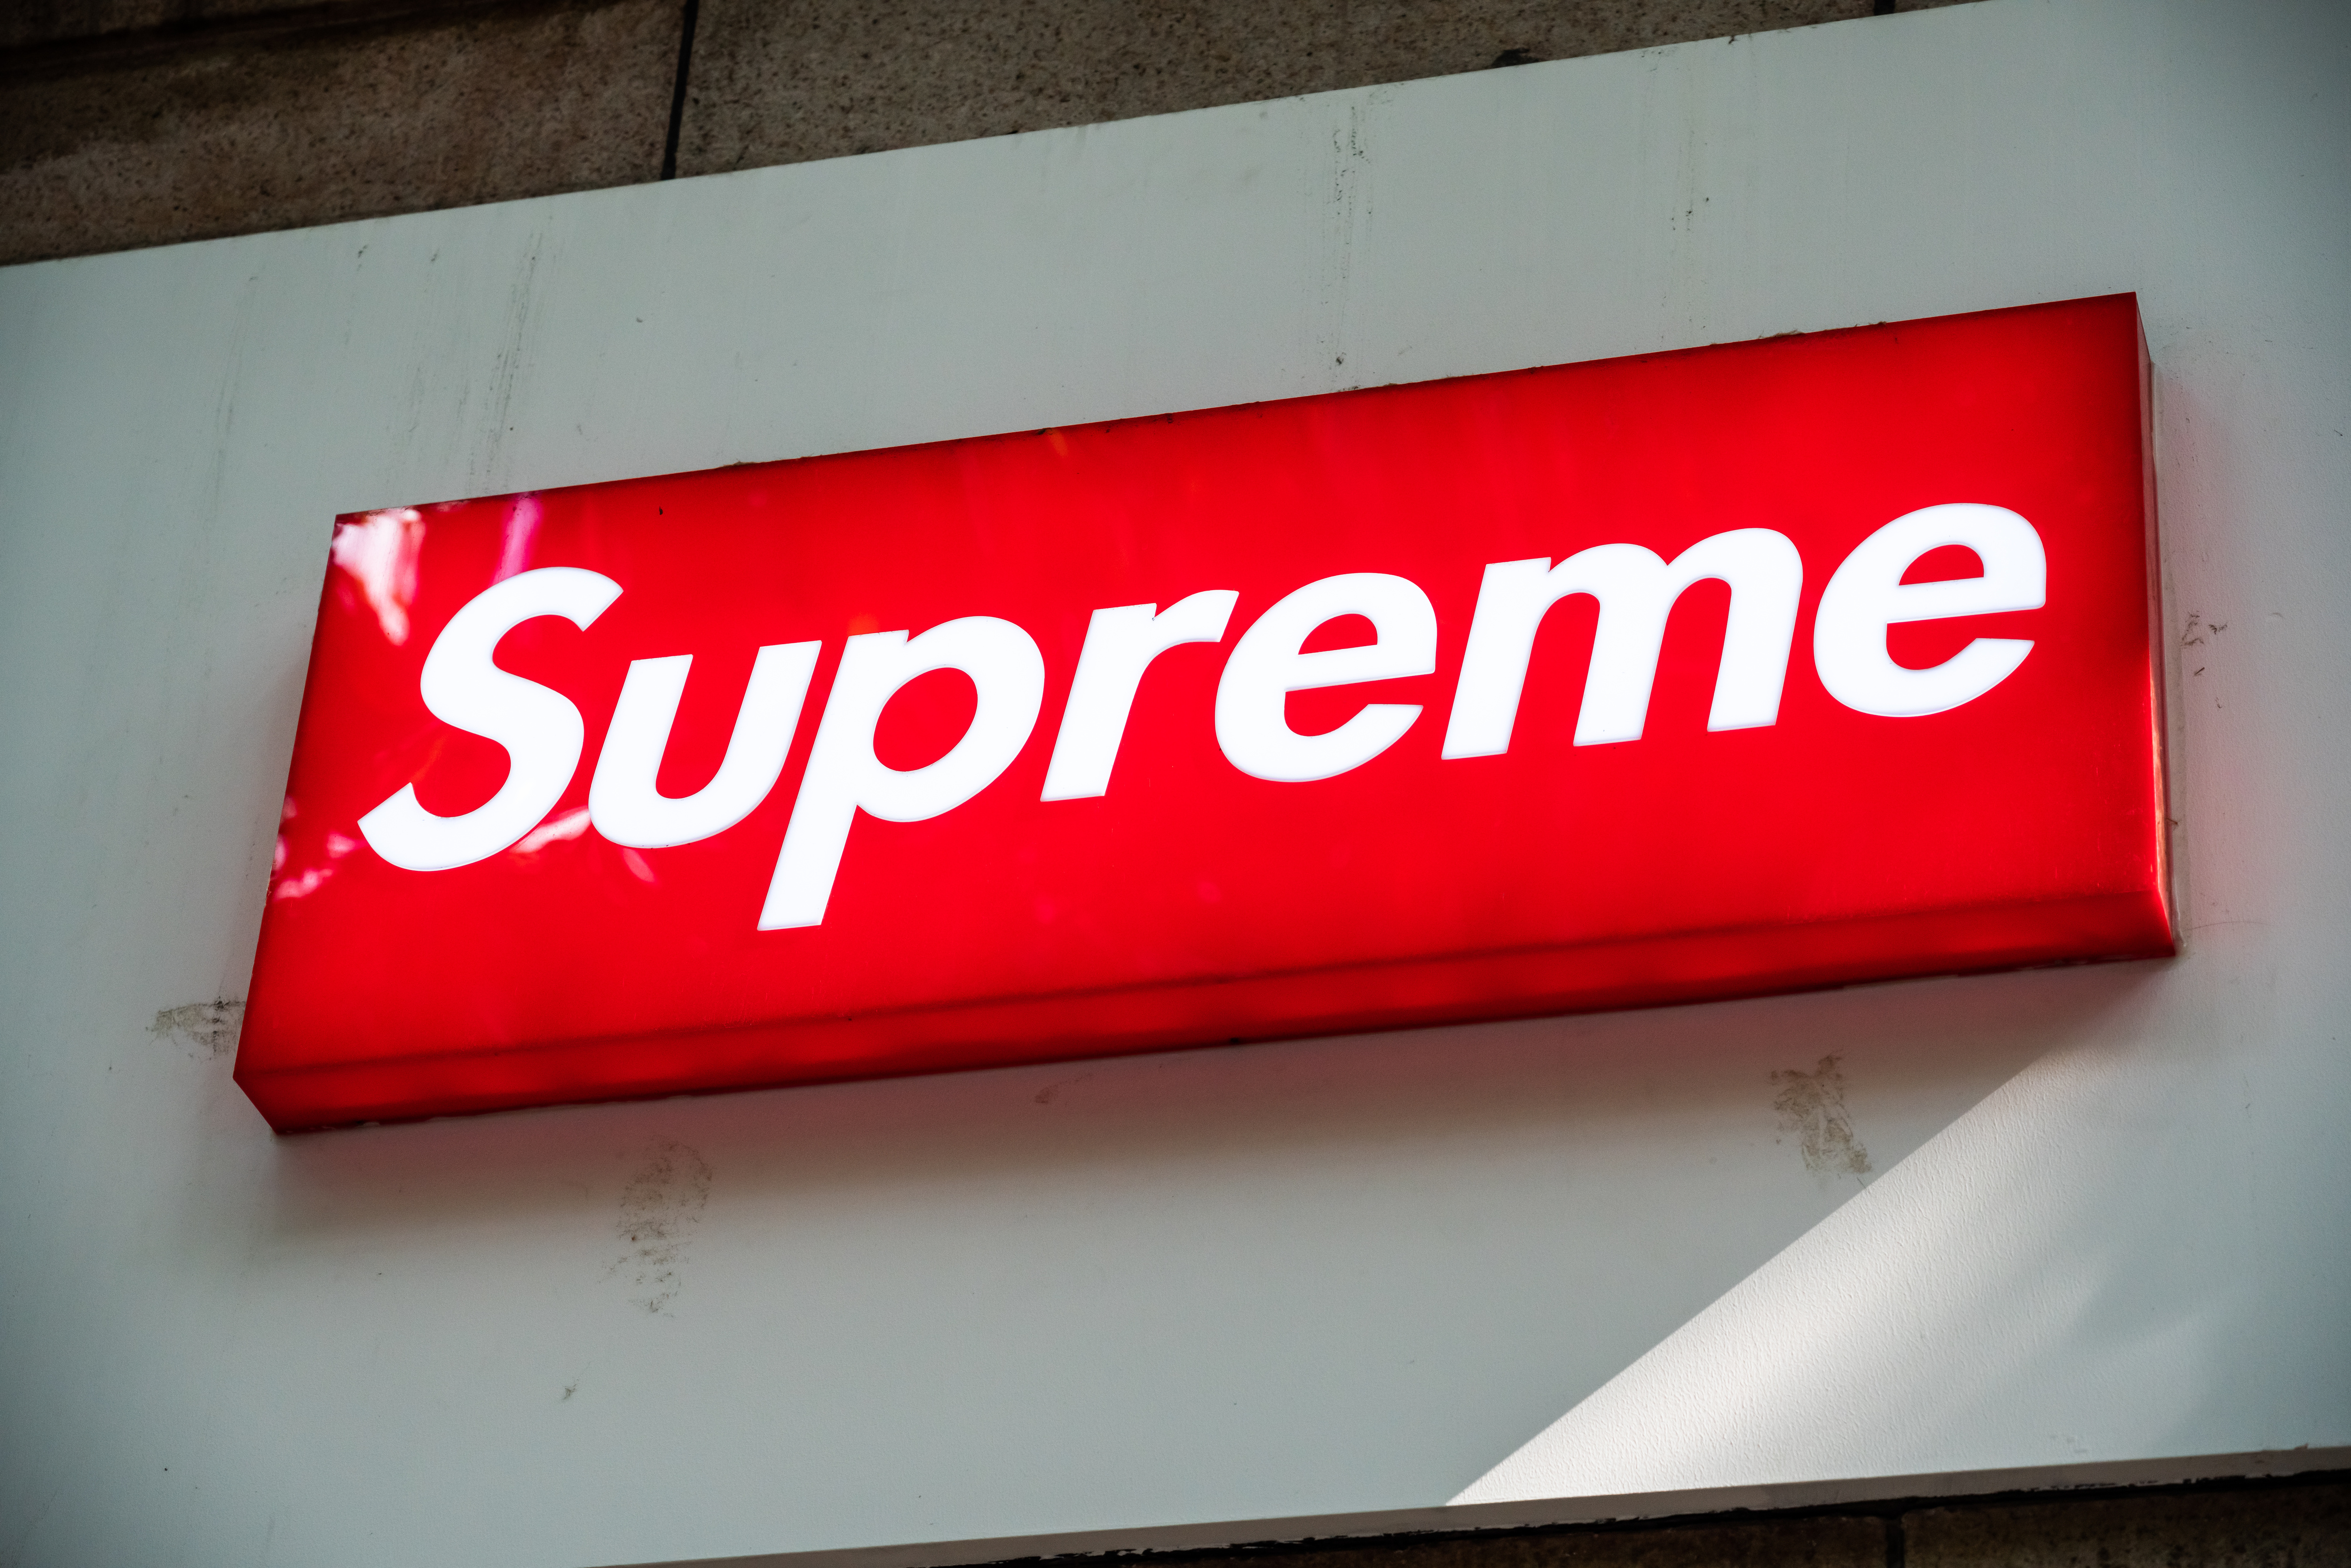 WeHo Residents Preparing For New ‘Supreme’ Location – CBS Los Angeles